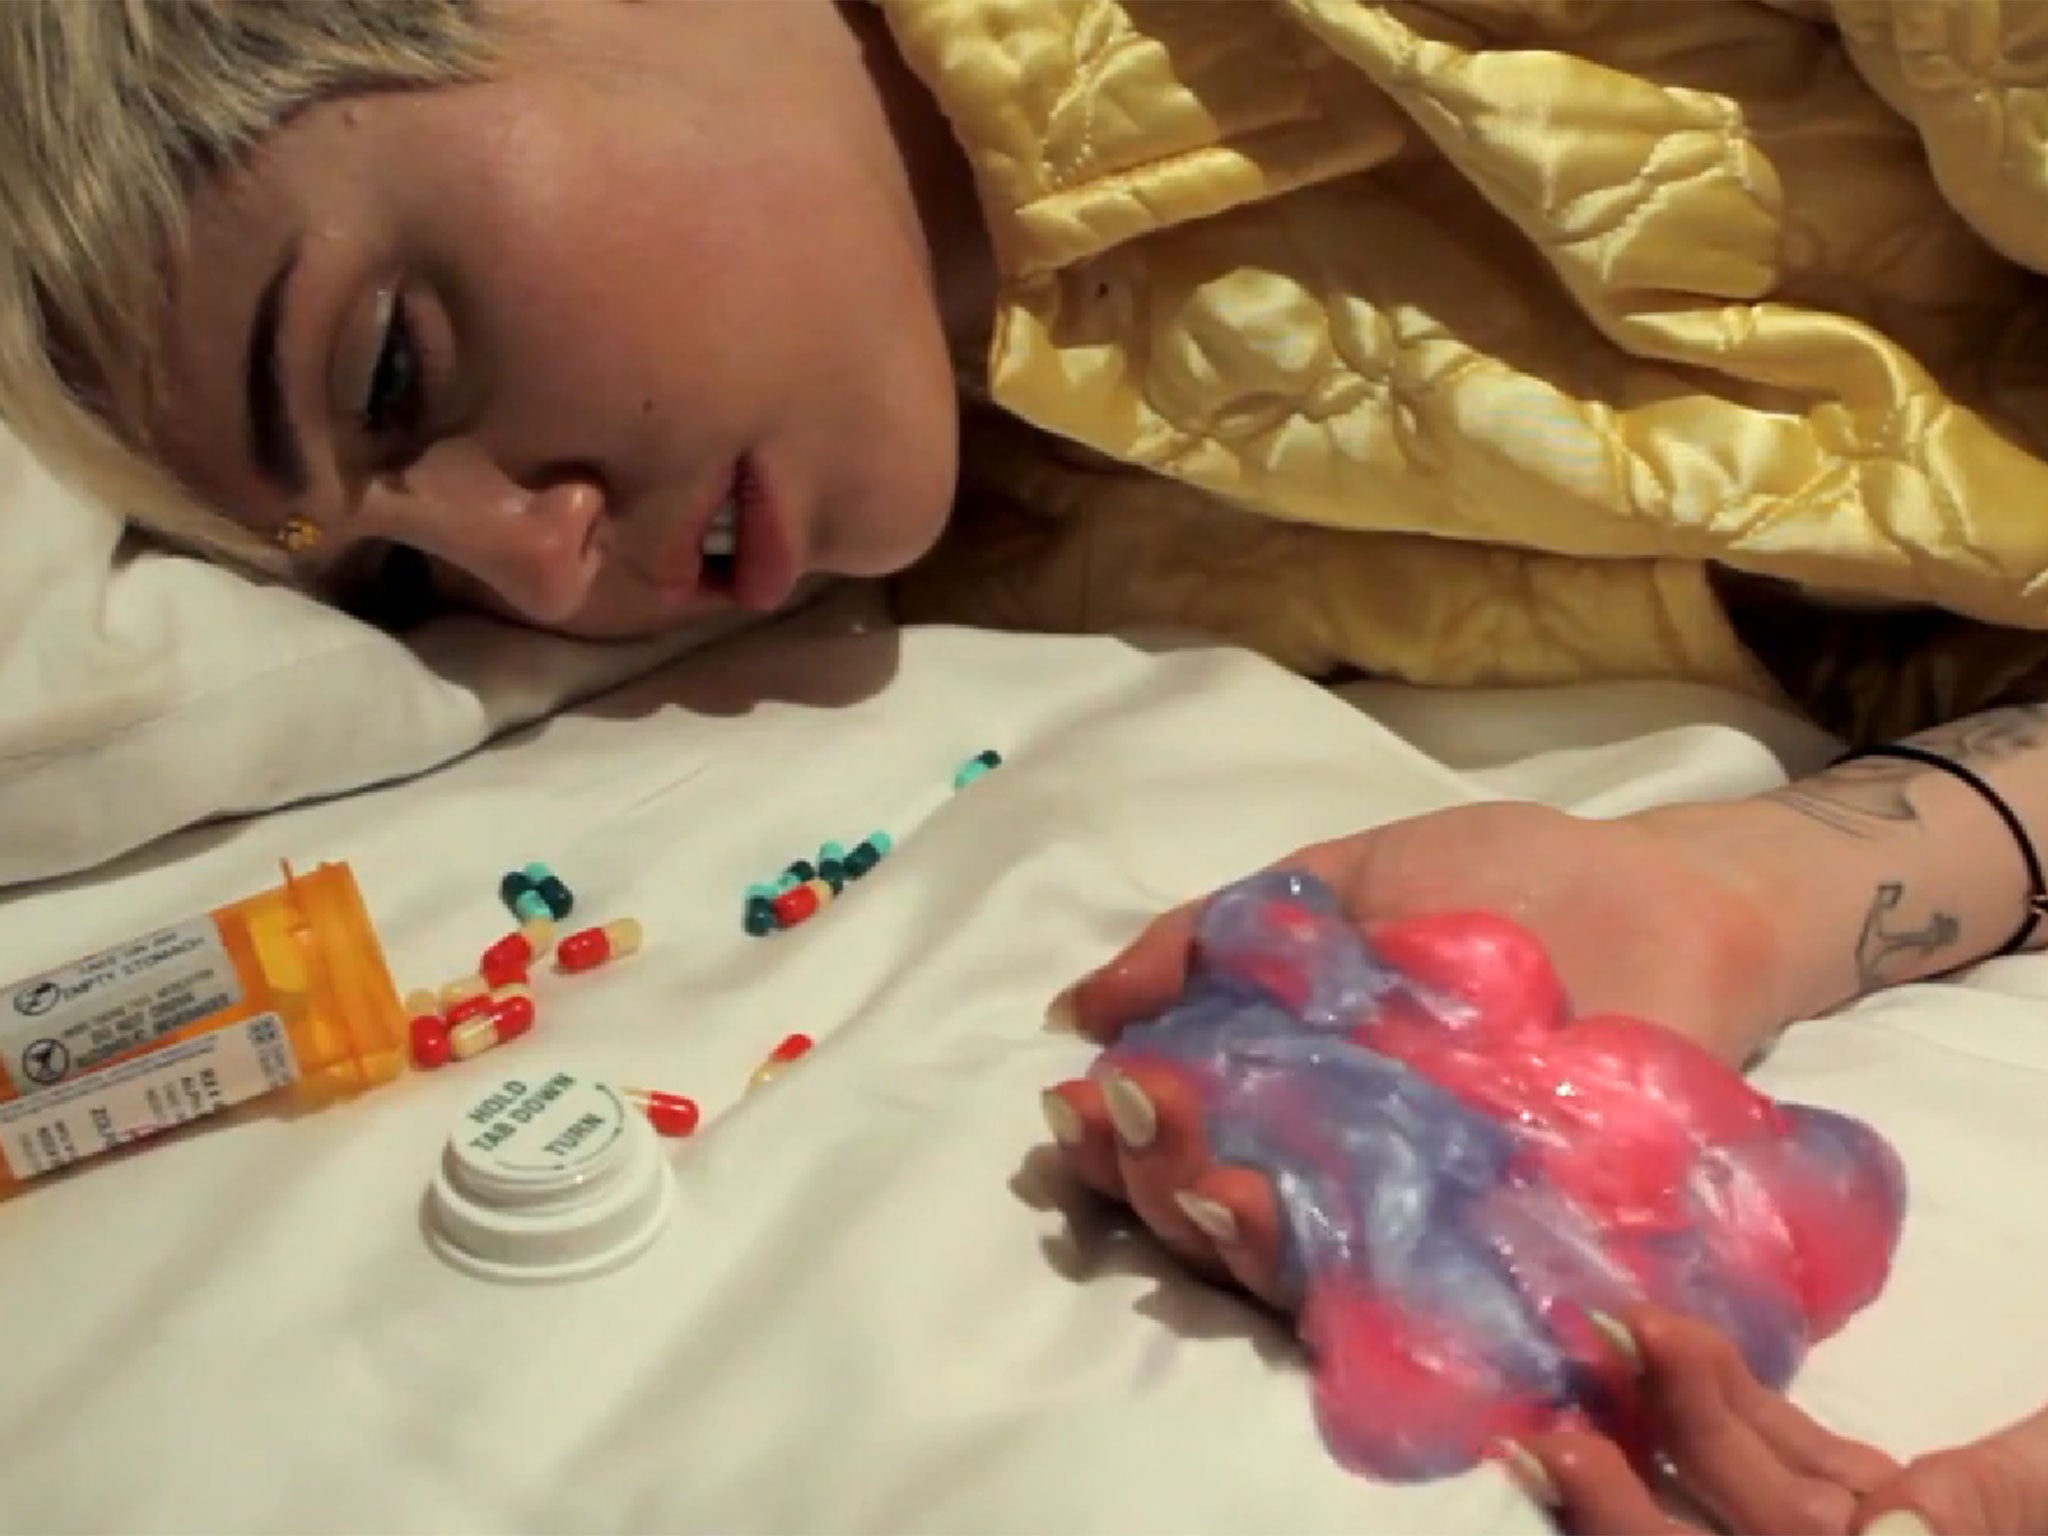 Miley Cyrus has her magic LSD brain stolen in this crazy video produced with The Flaming Lips